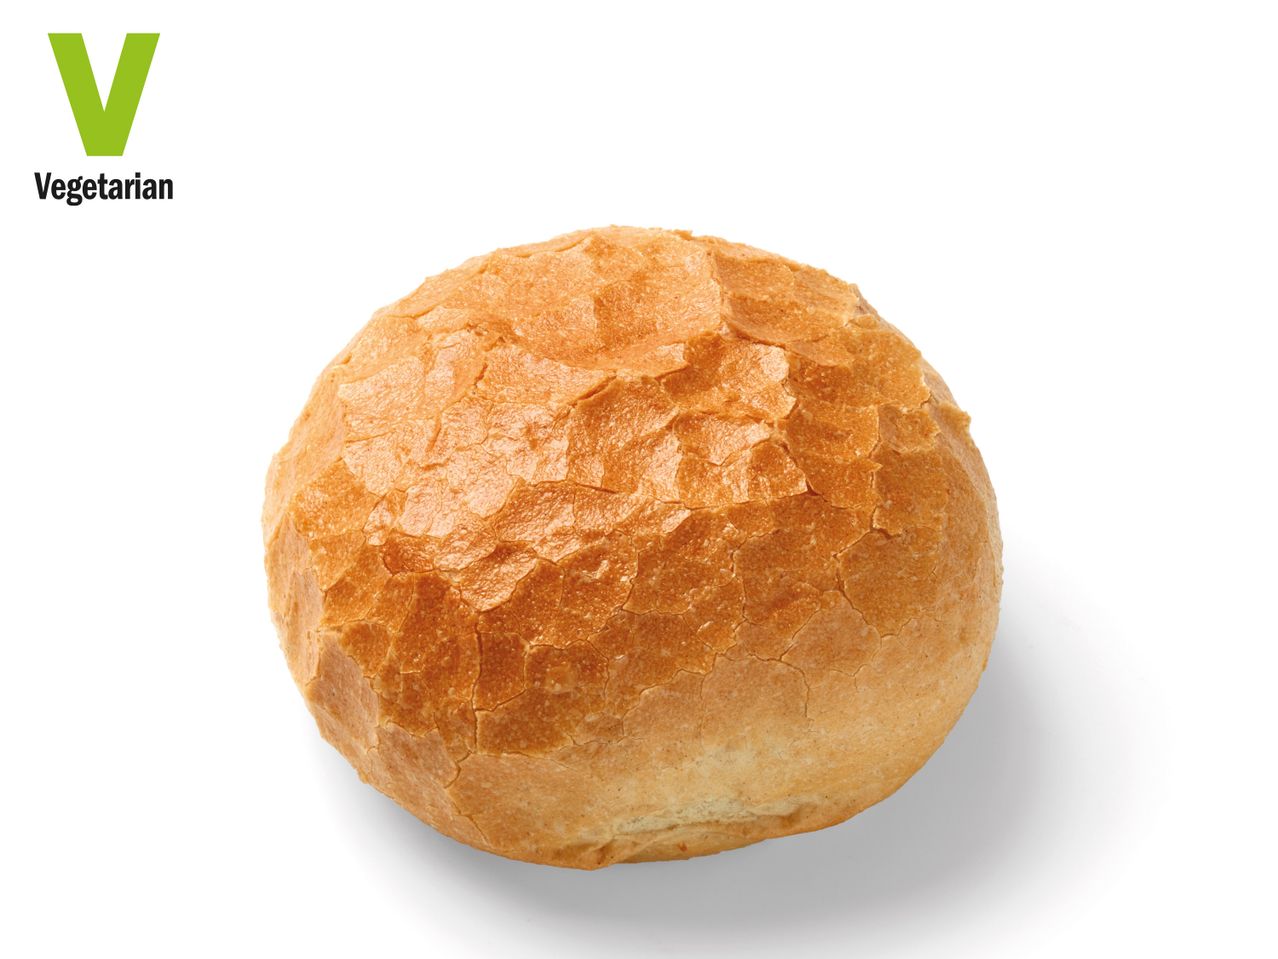 Go to full screen view: White Crusty Roll - Image 1